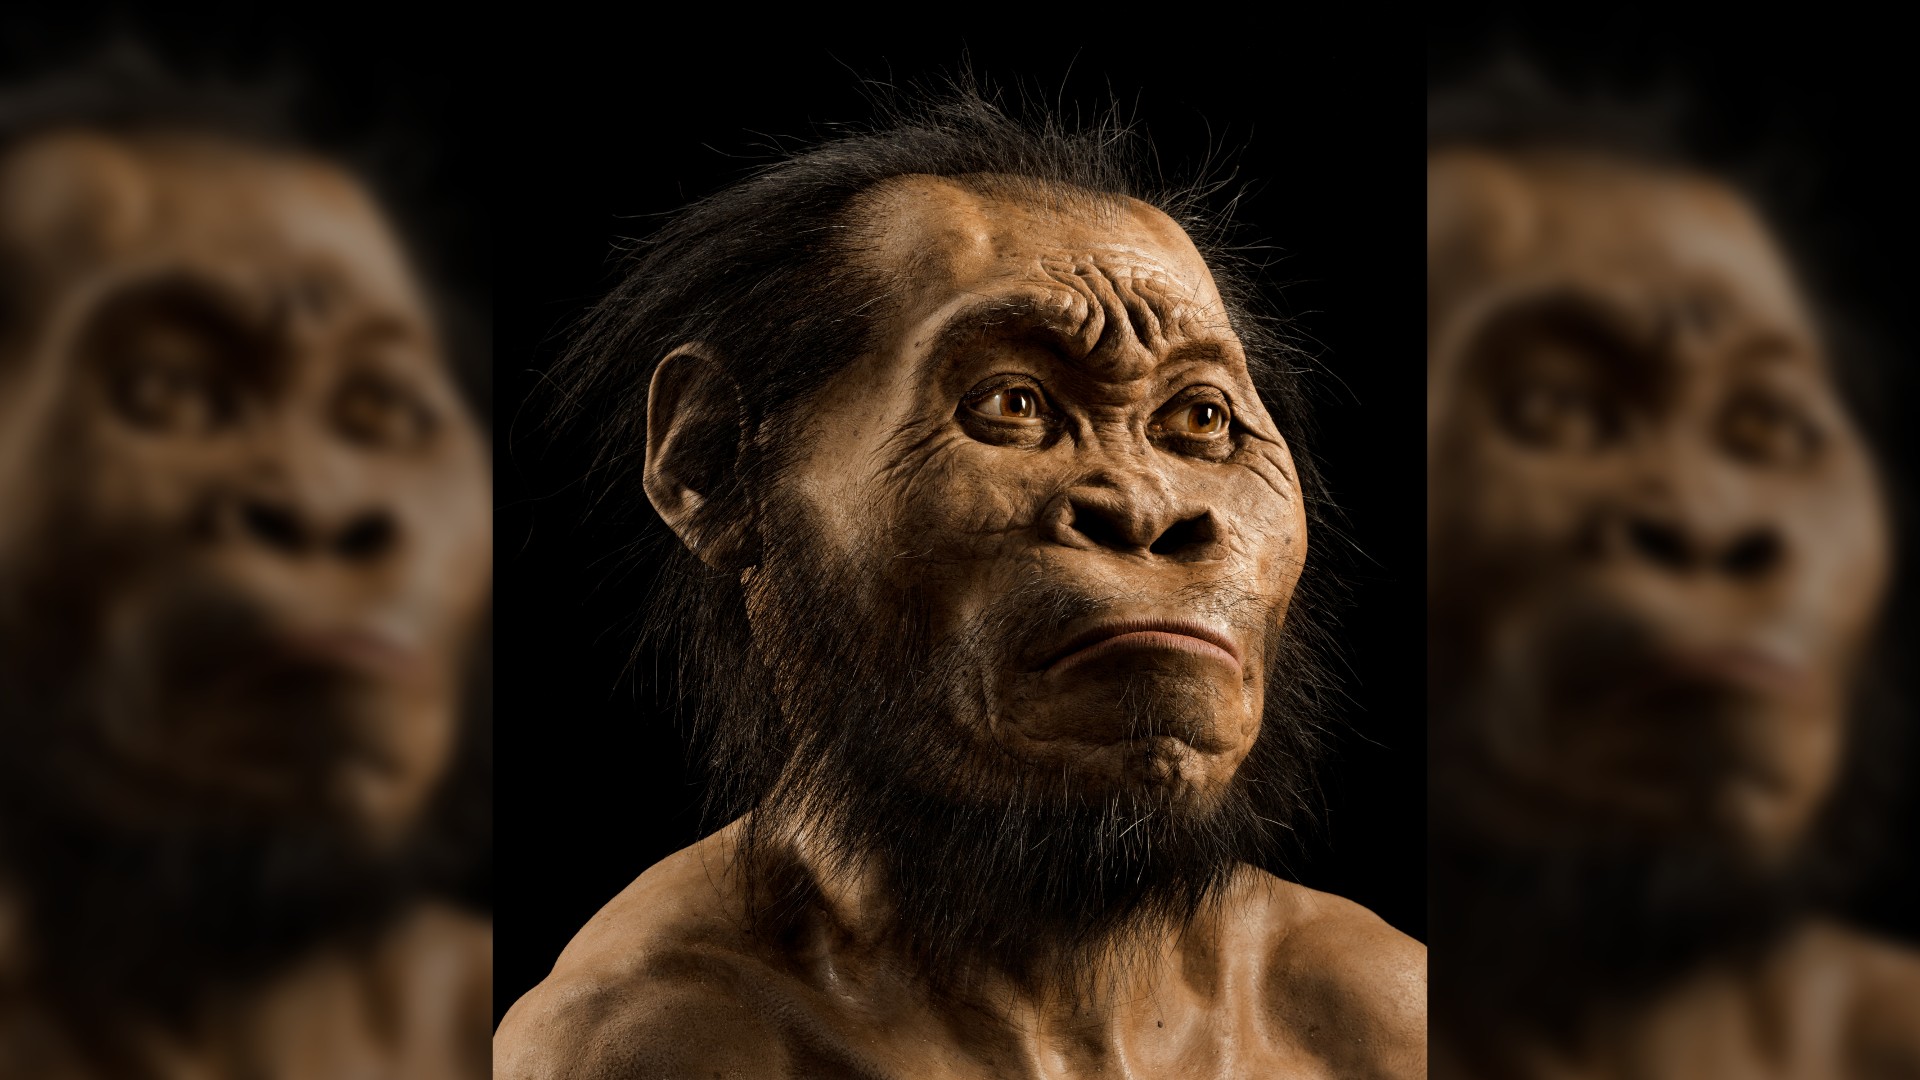 Extinct human relative buried their dead 100,000 years before modern humans did, study claims